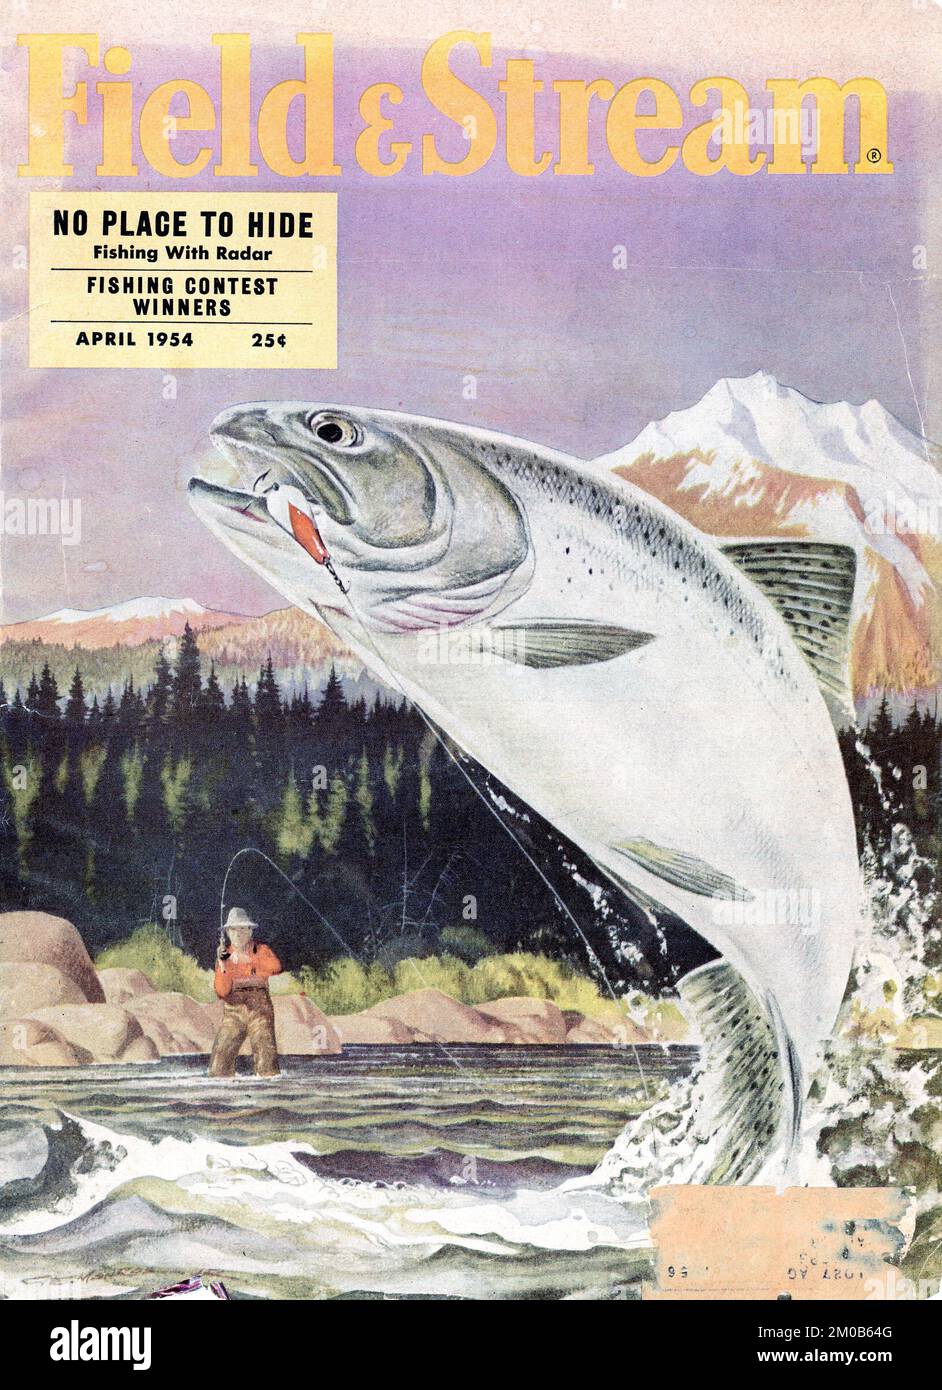 July 1957 Field & Stream magazine cover illustrated by Raphael Cavaliere.  #vintage #magazine #fishing